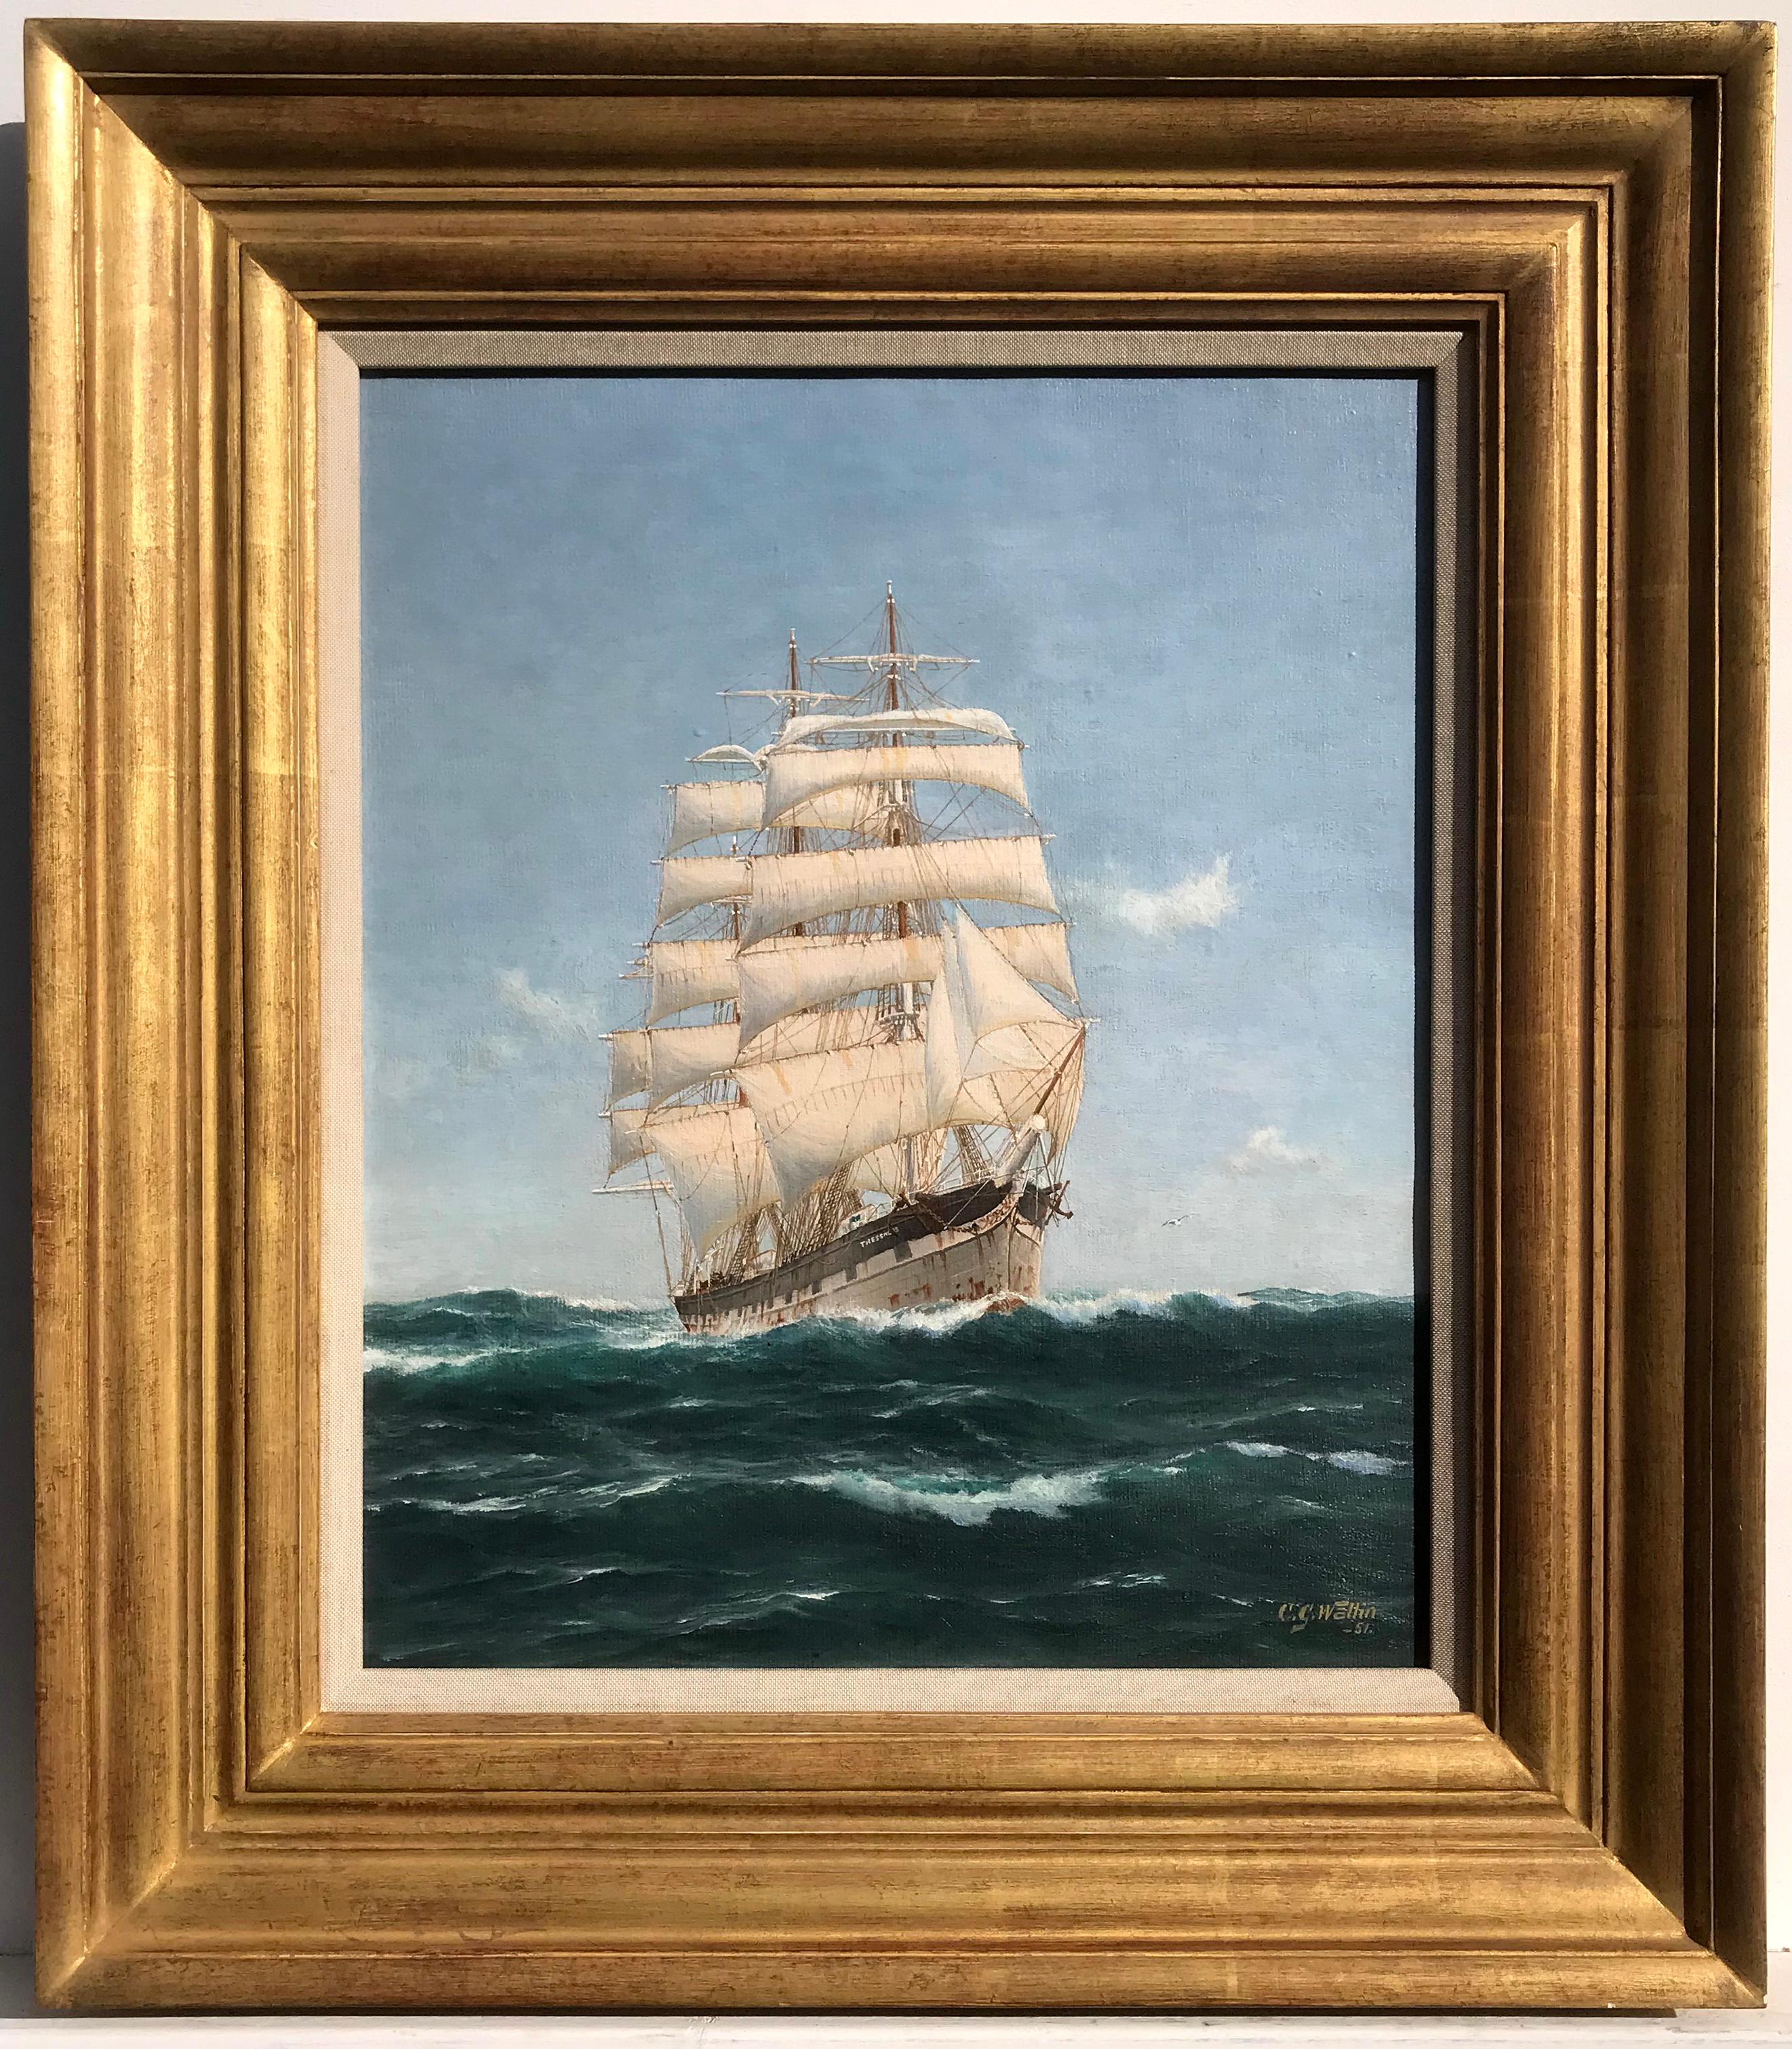 Clipper at Sail - Running with the Wind, Marine Oil on Canvas Painting